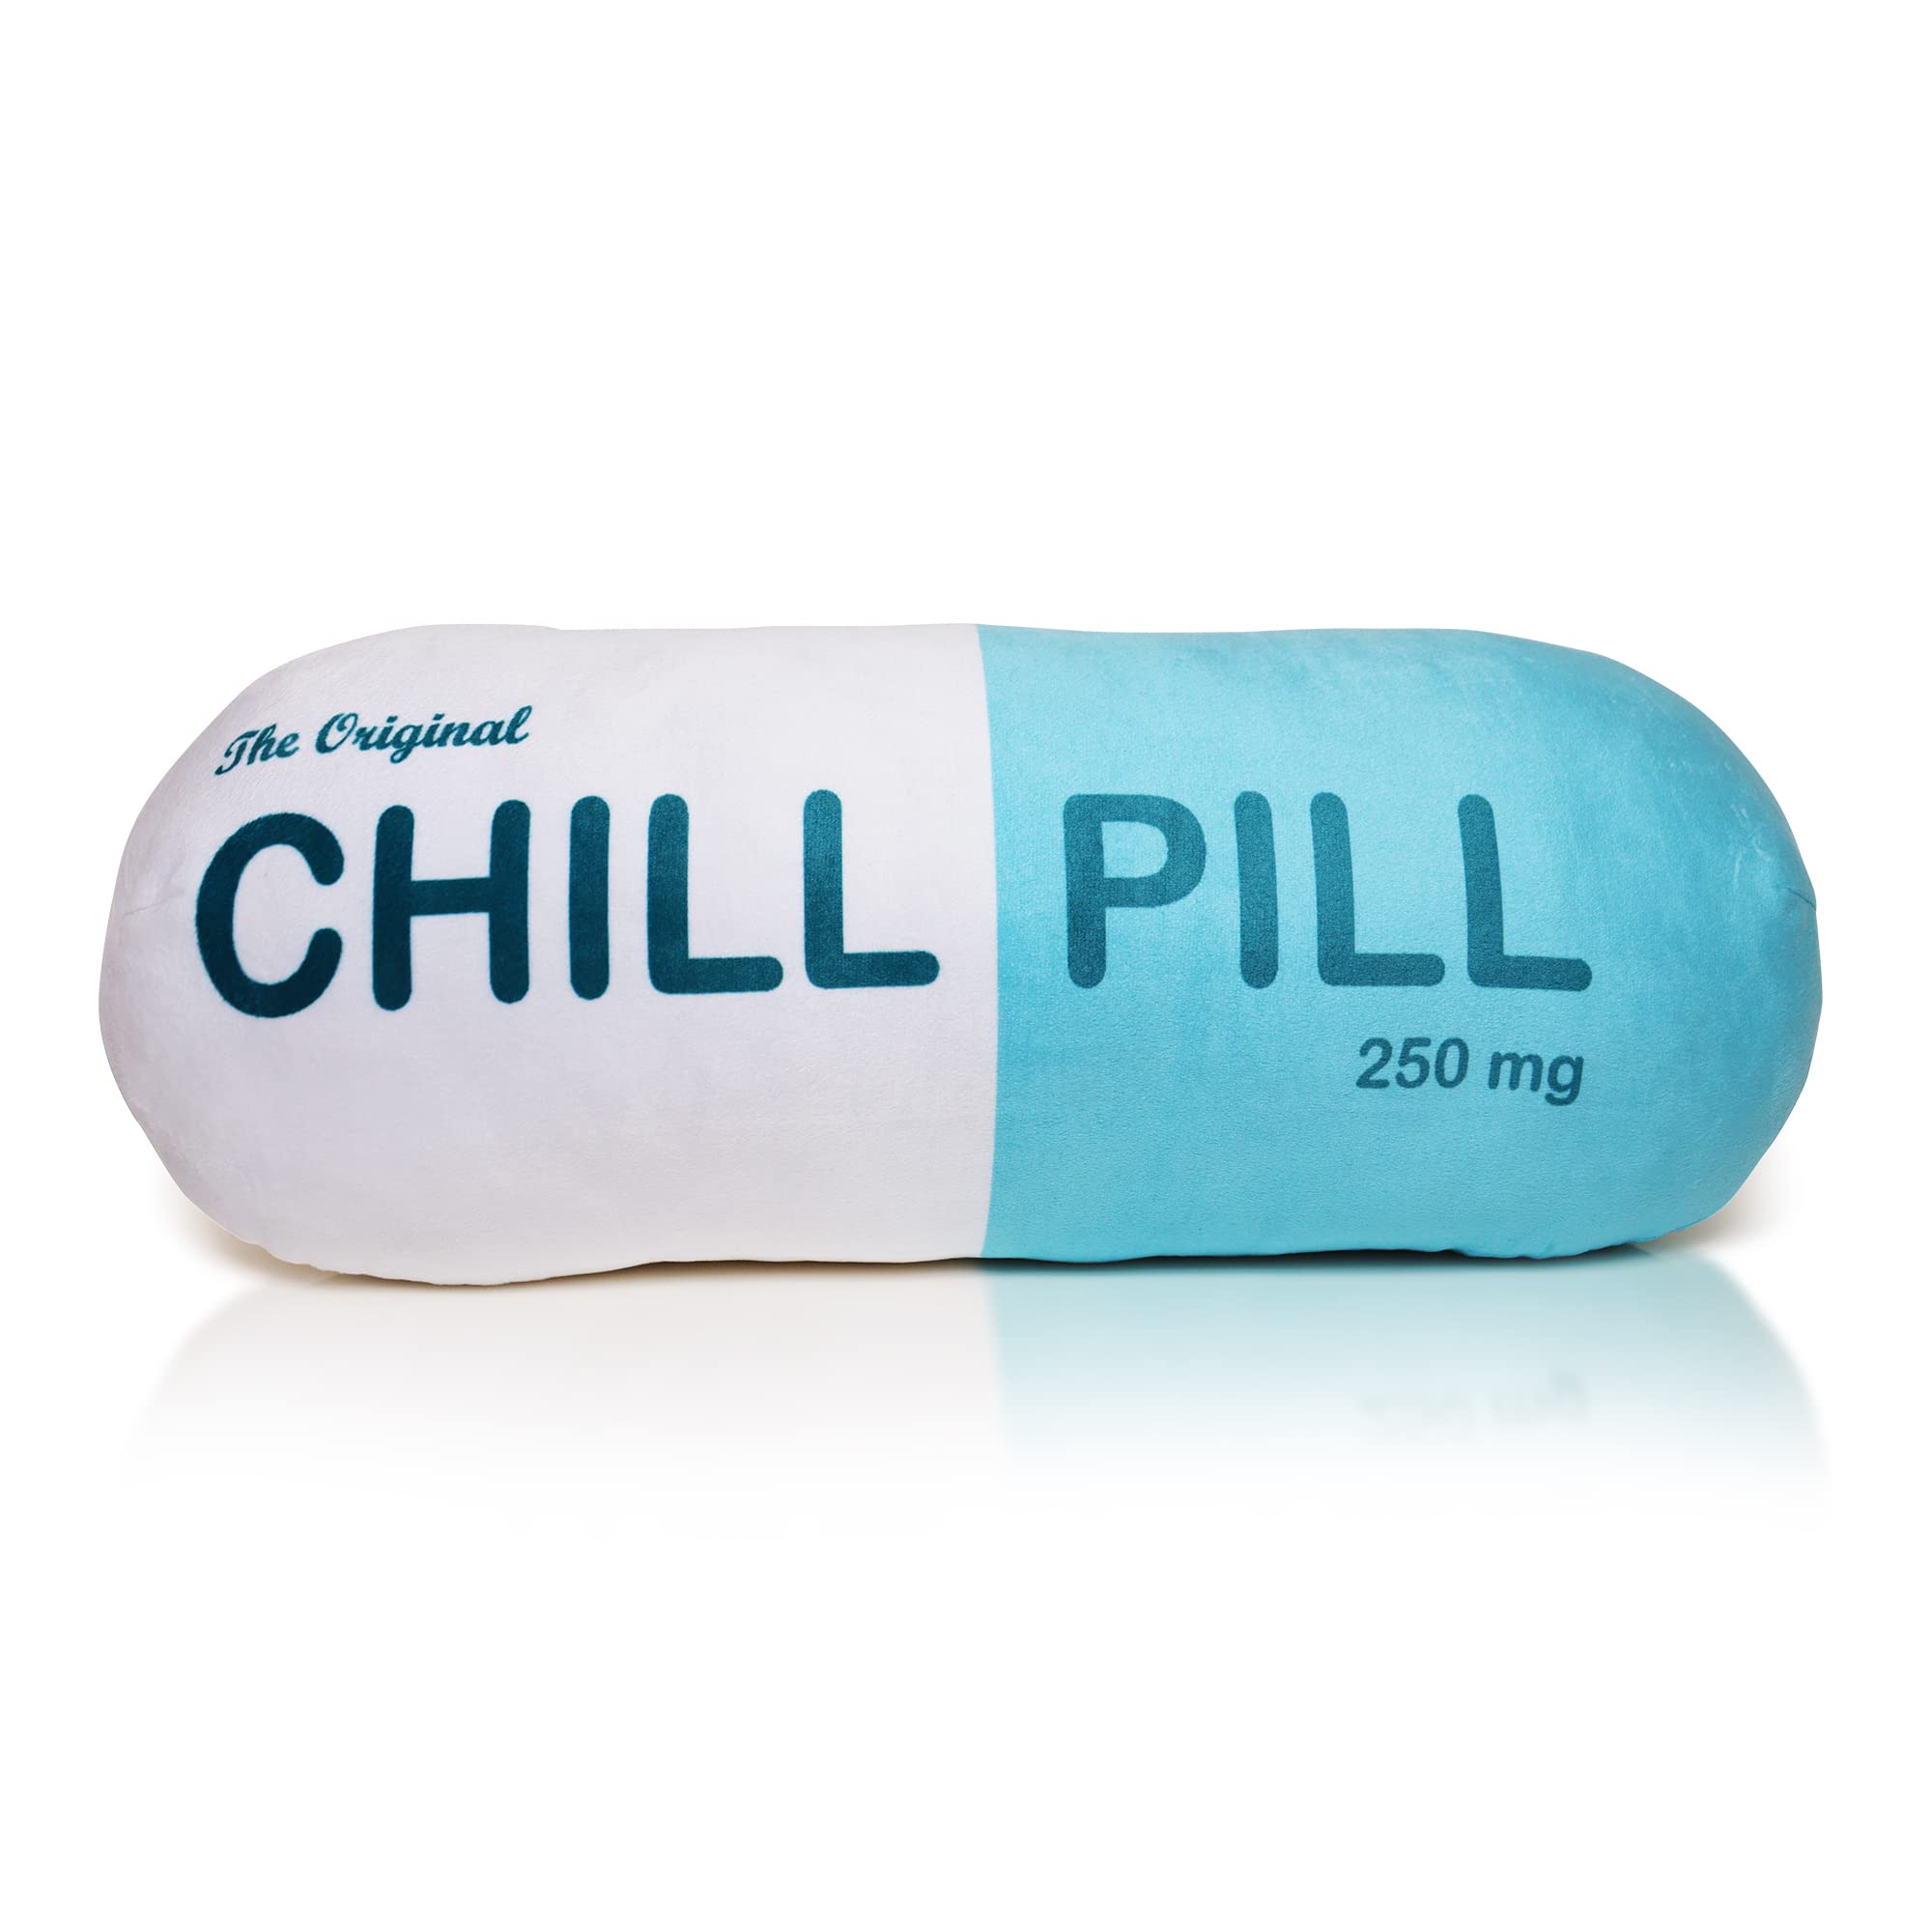 eBody The Original Chill Pill Pillow – Larger Size 18" x 6.5" - Funny and Cute Memory Foam Throw Pillow That is Made with Premium Cuddlesoft Fabric for a Velvety Feel (Pink)